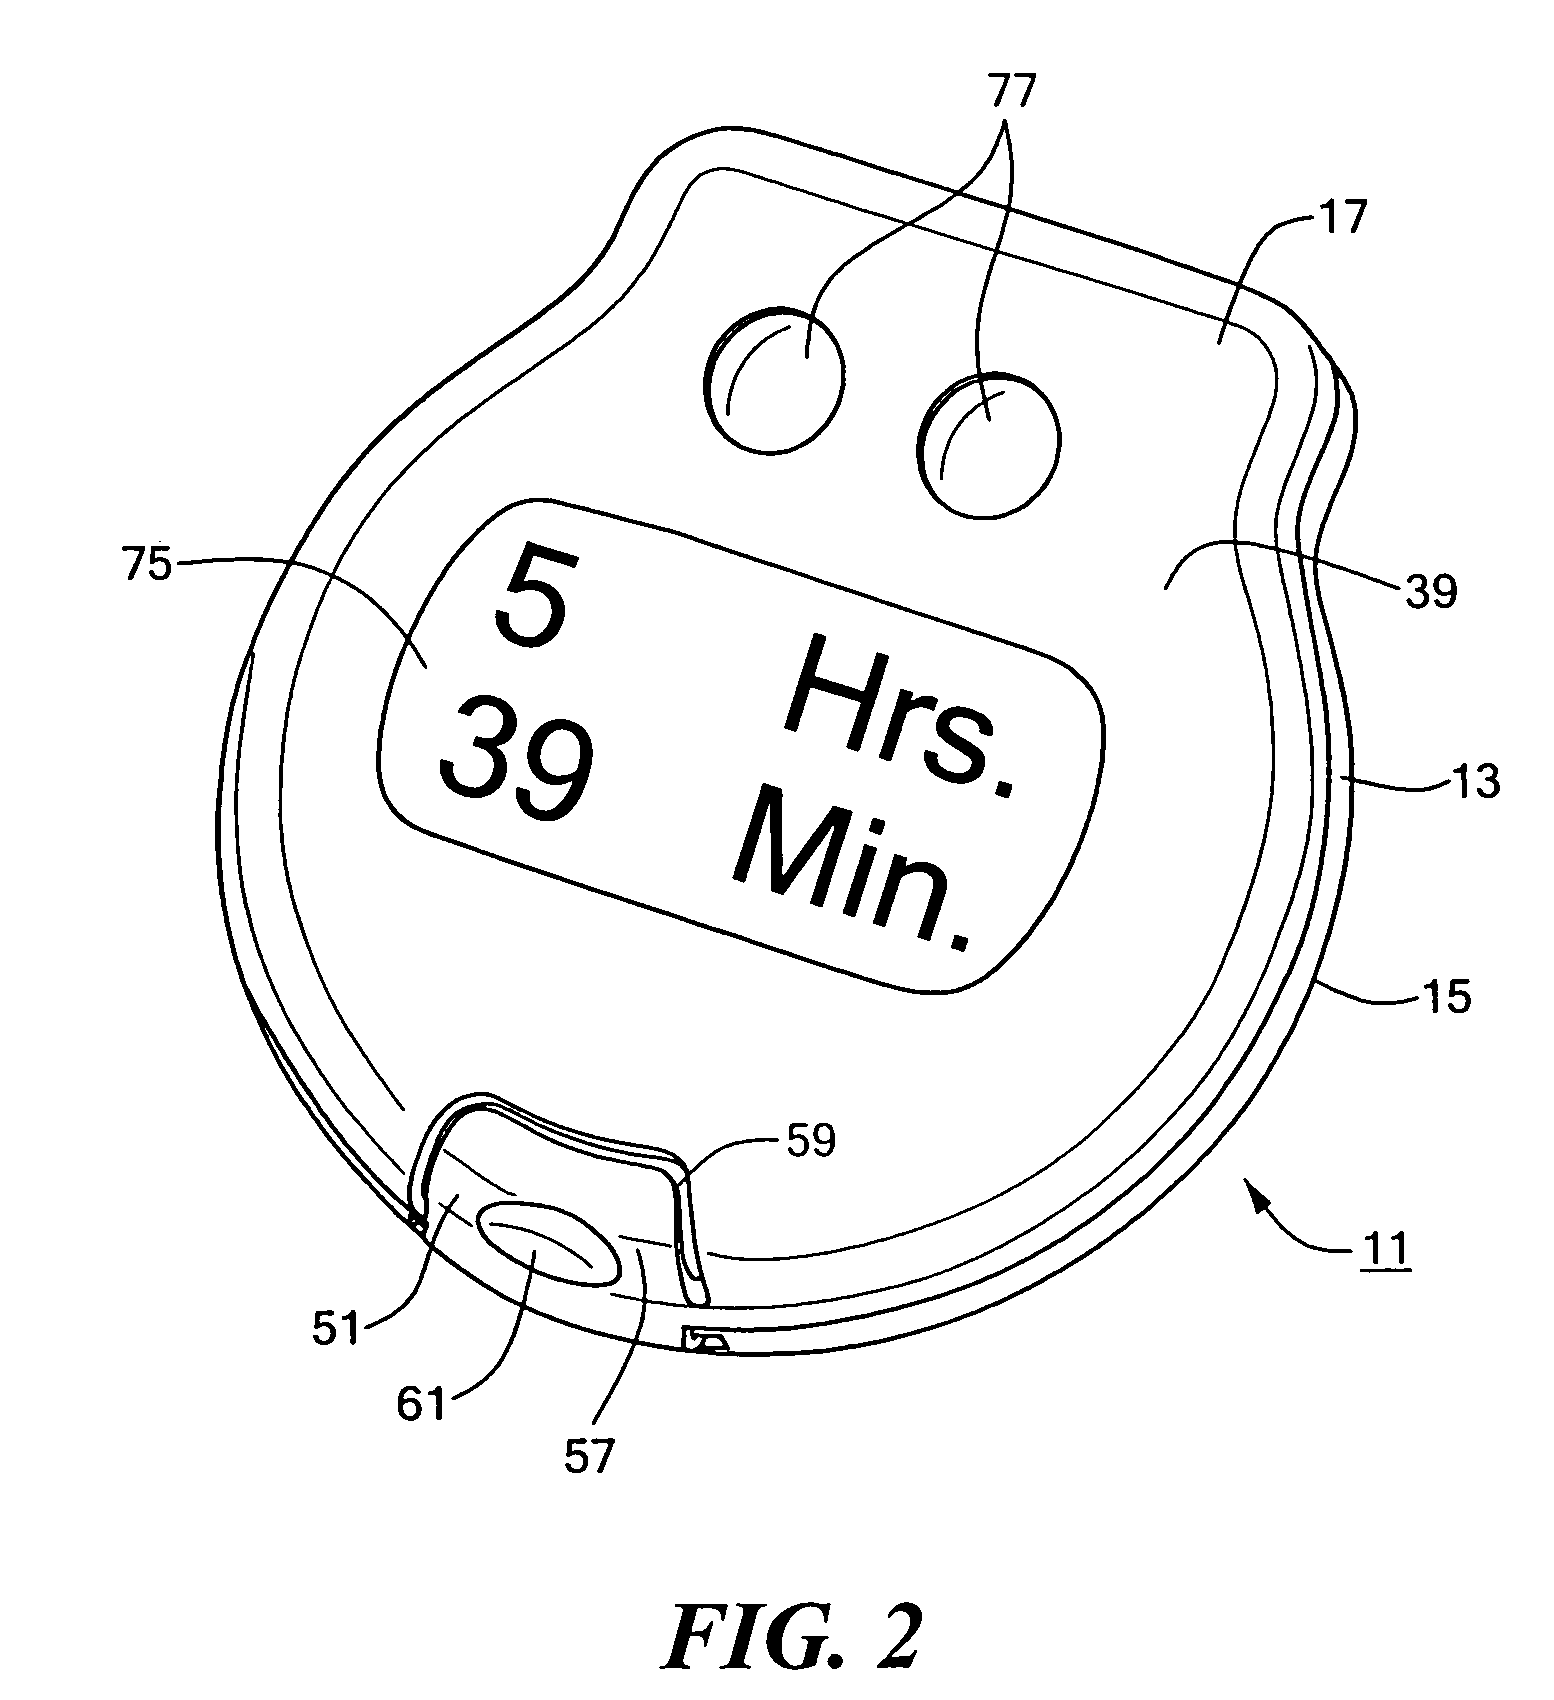 Device for monitoring the administration of enteral nutritional fluids into a feeding tube